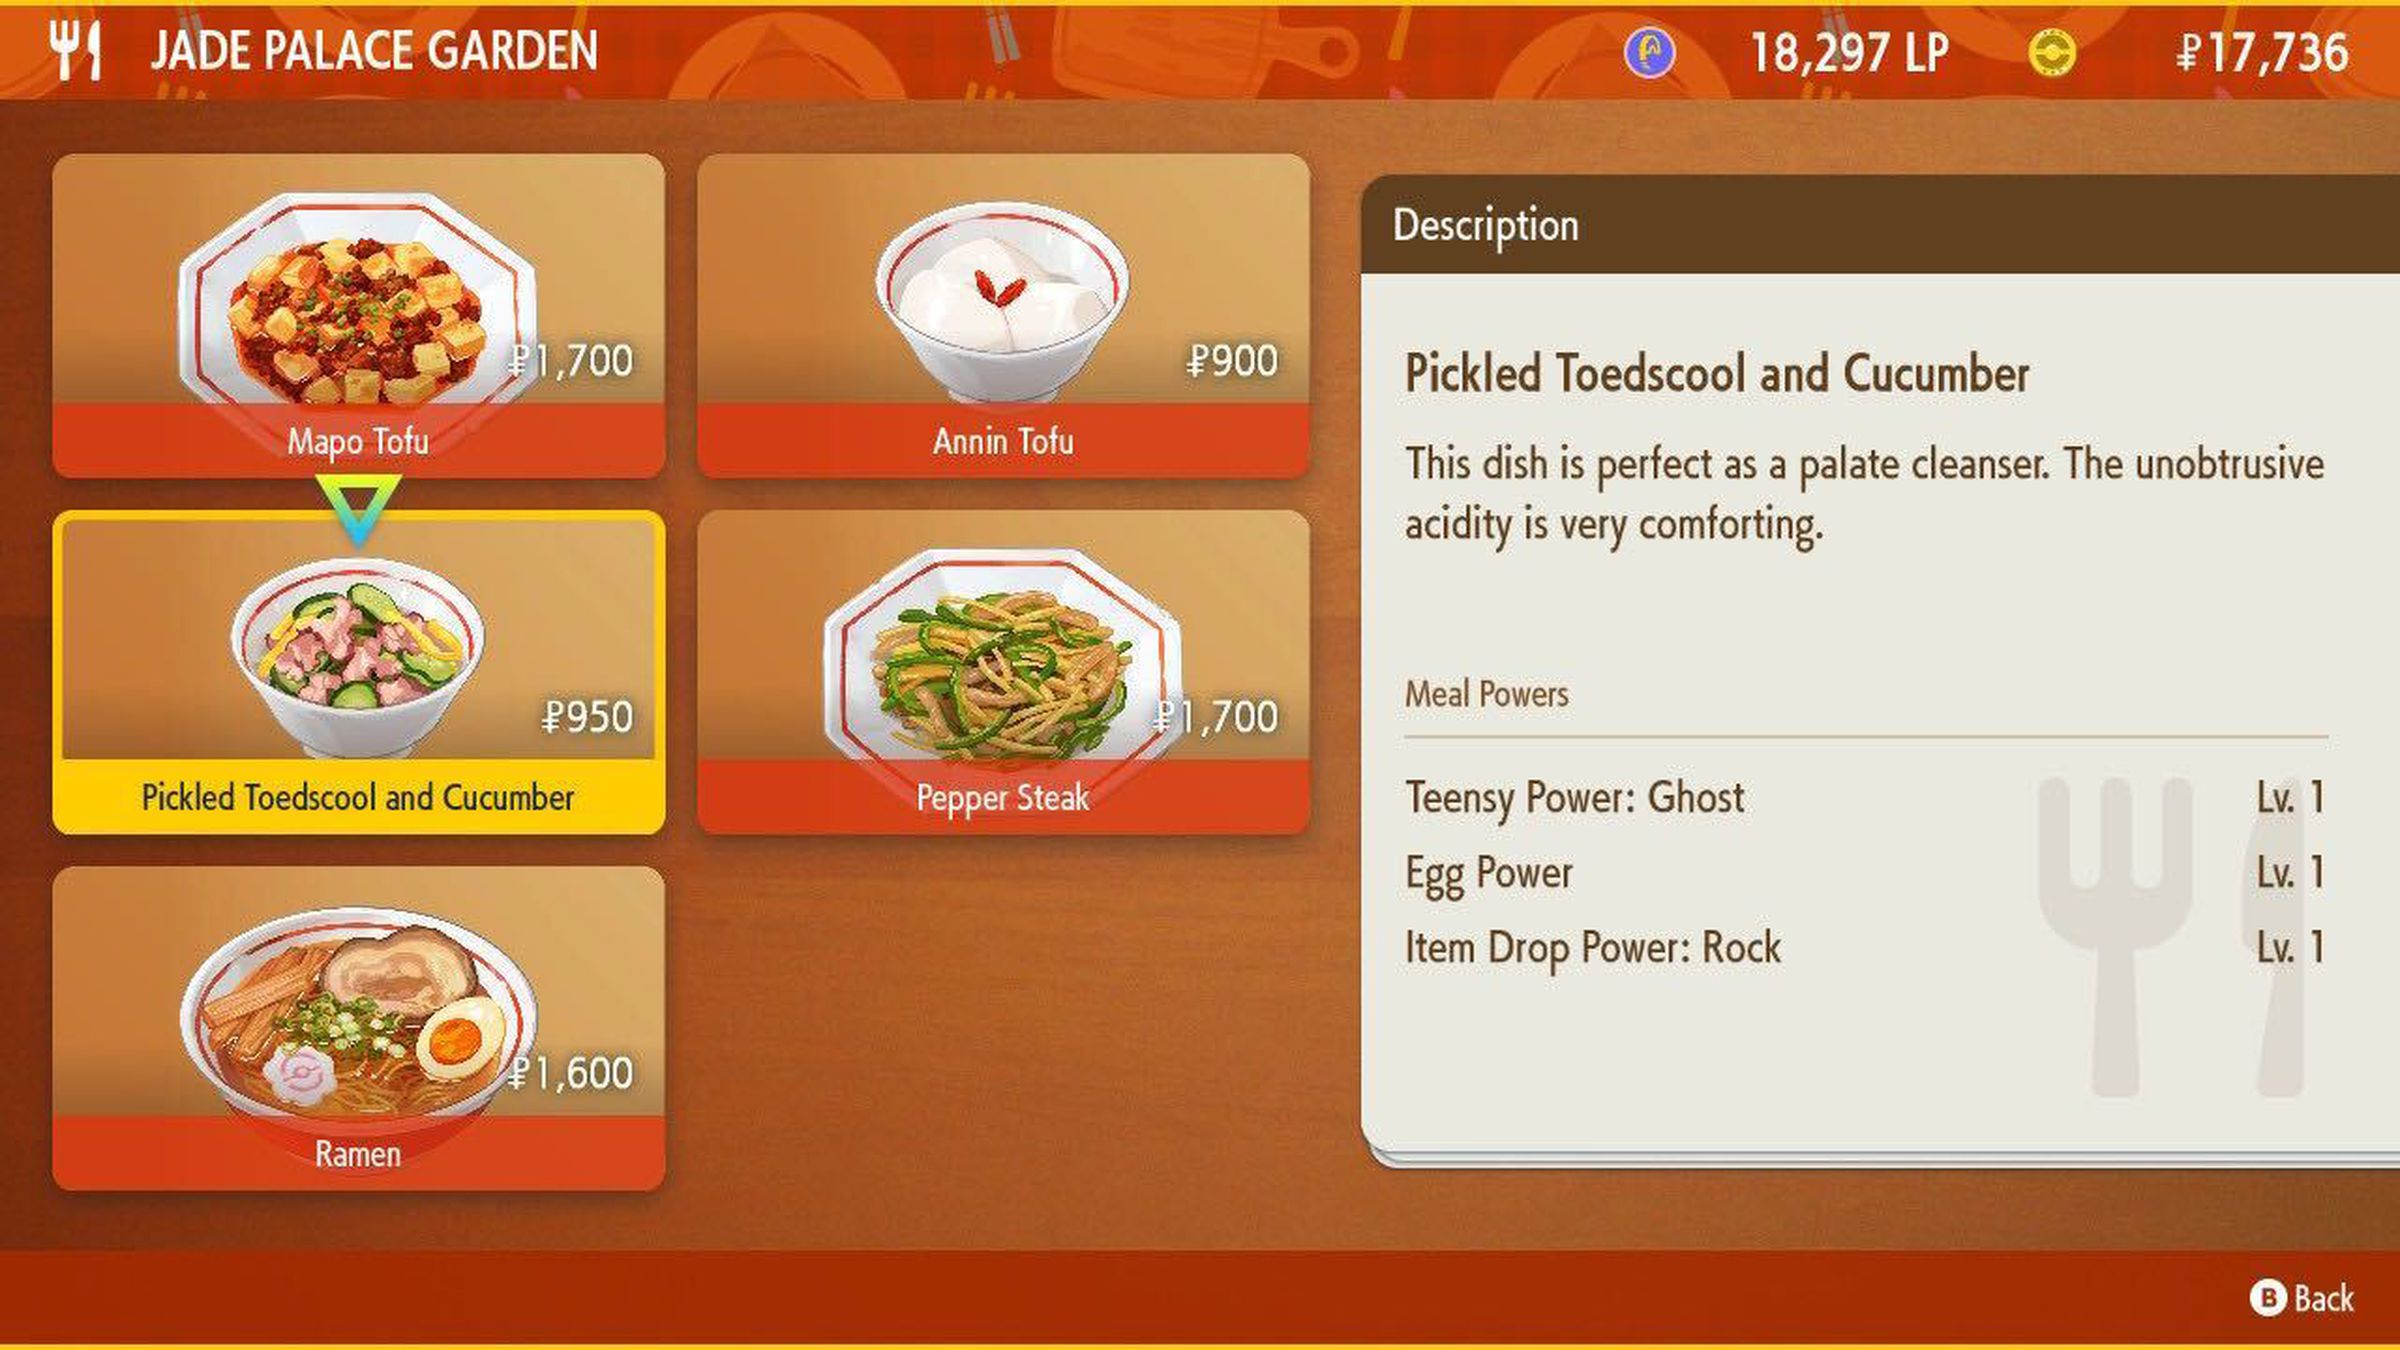 Jade Palace Garden’s menu including Picked Toedscool and Cucumbers.